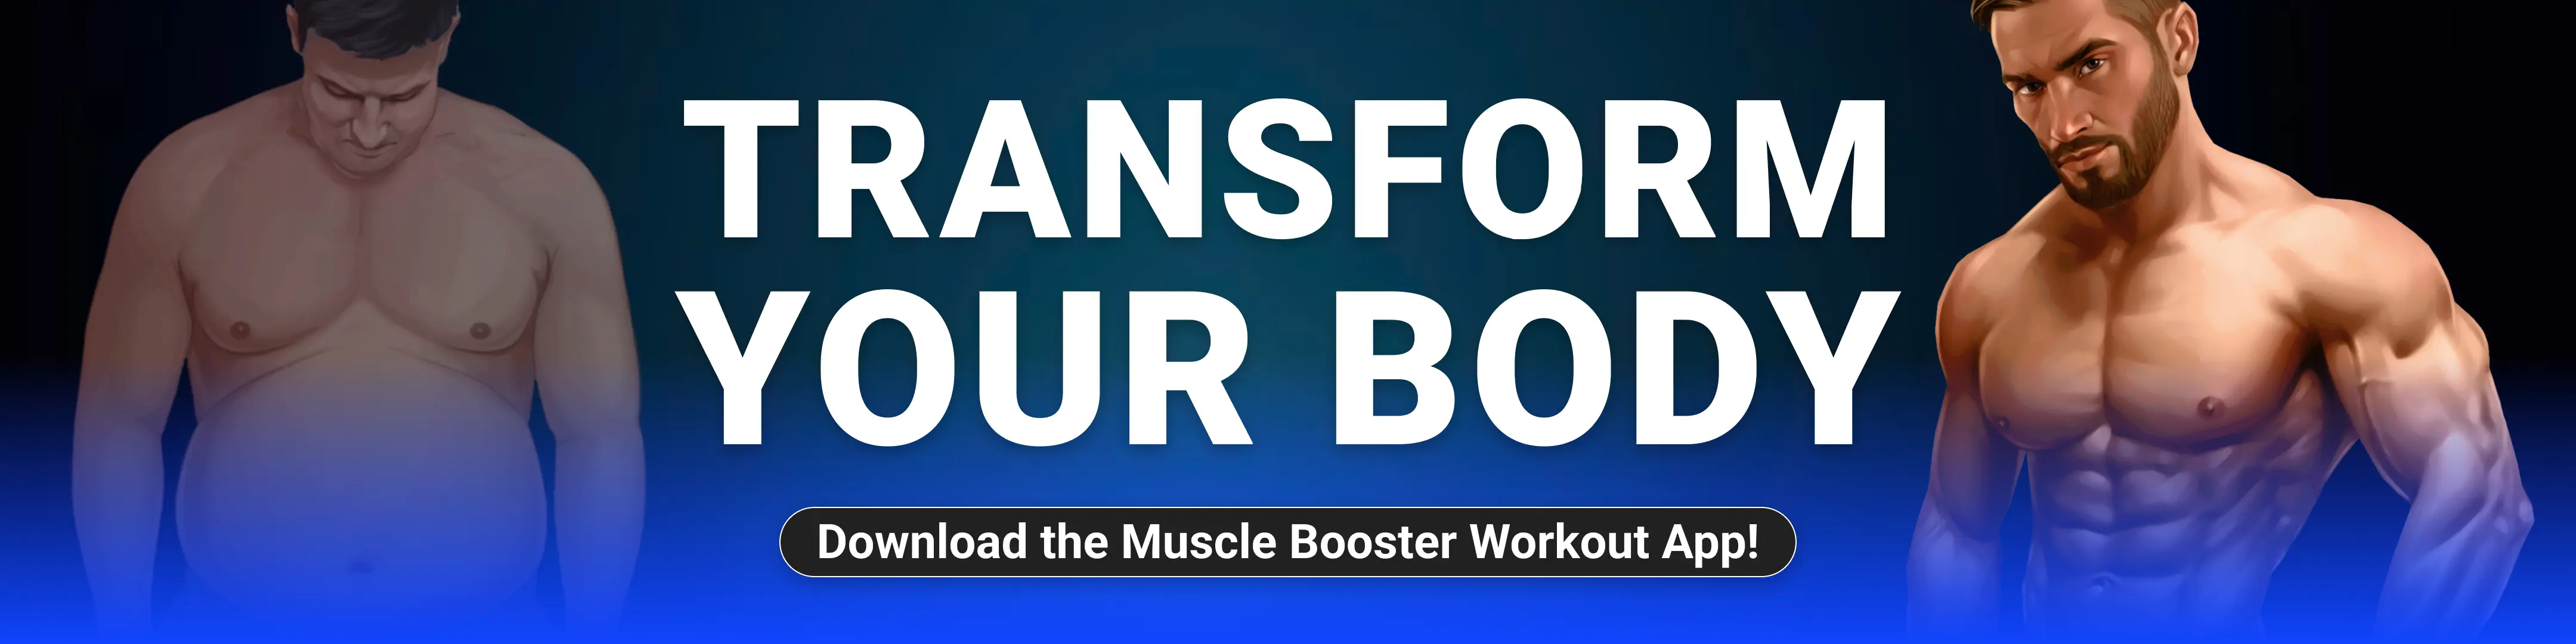 Best Workout Experience with Muscle Booster App